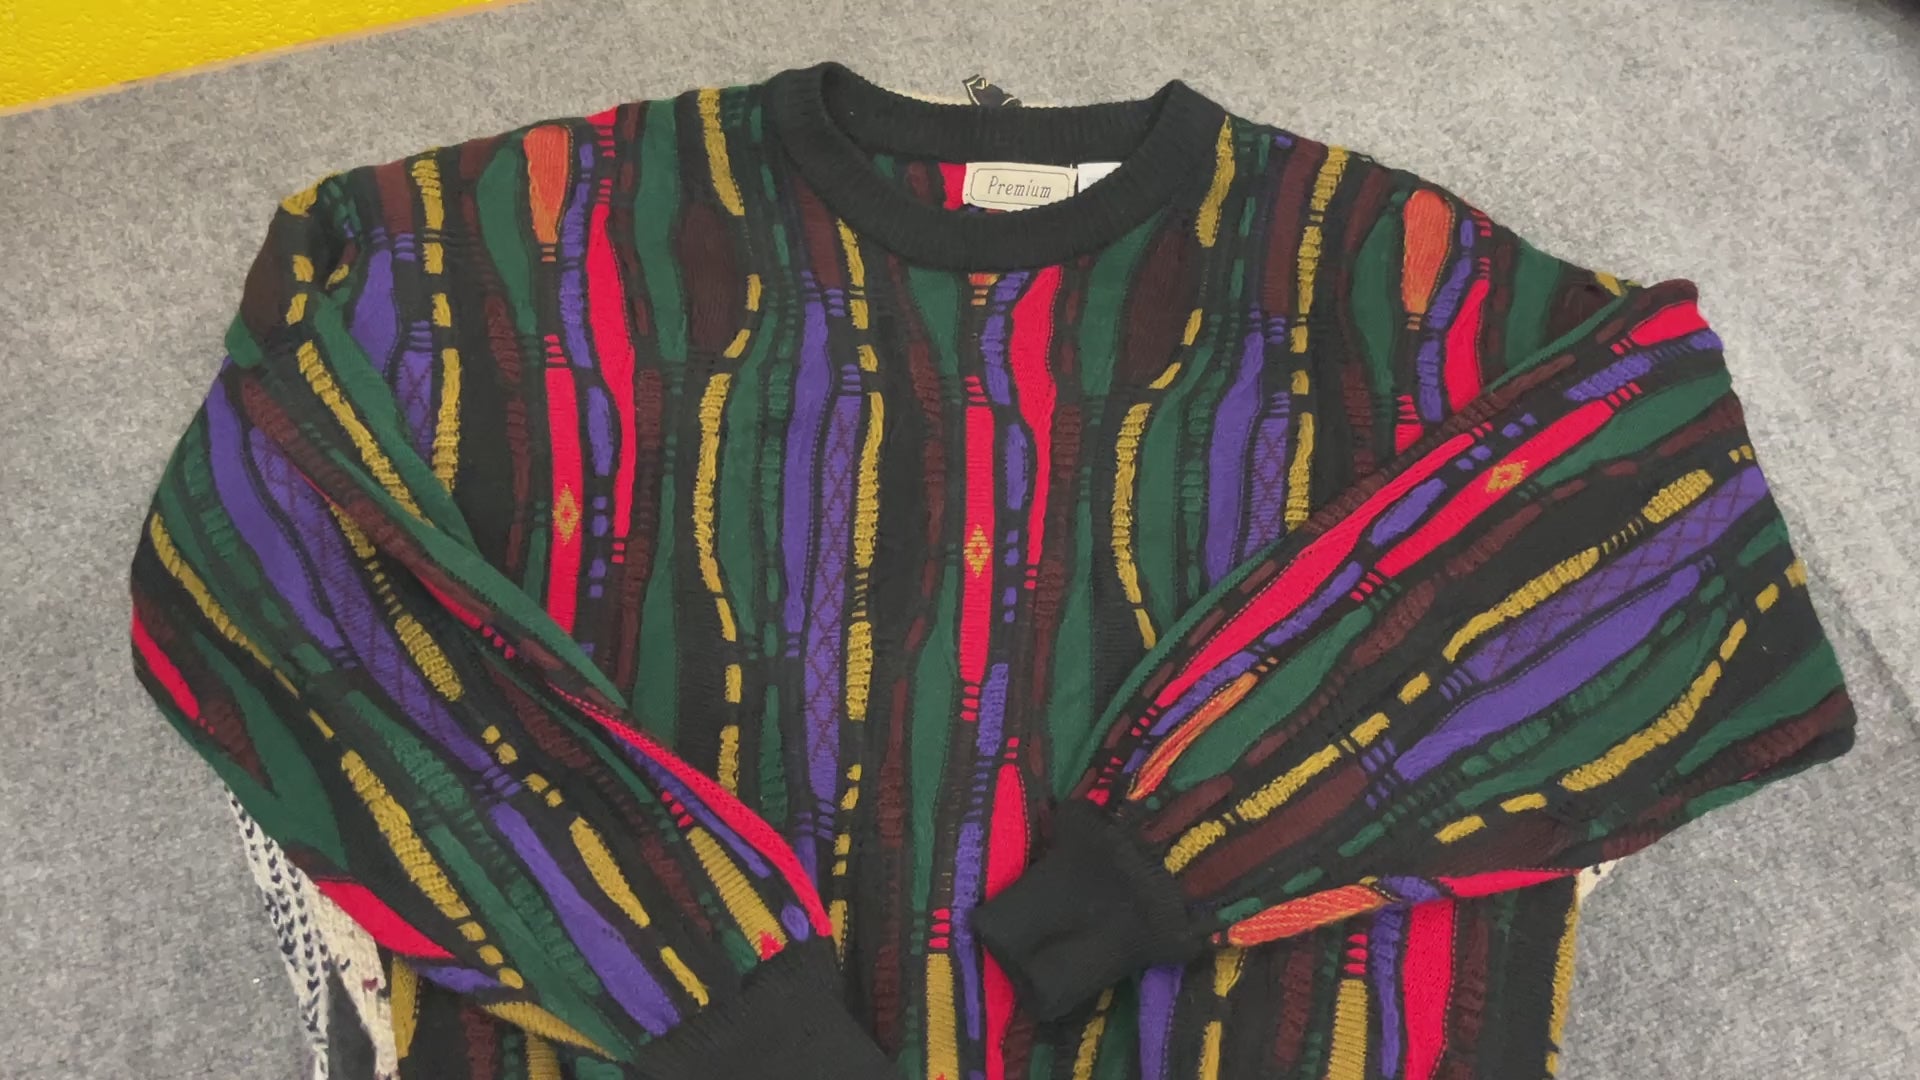 Vintage Knit Sweater Bulk Pack #4 | 10 Pieces Coogi Style, Geometric, Colorful